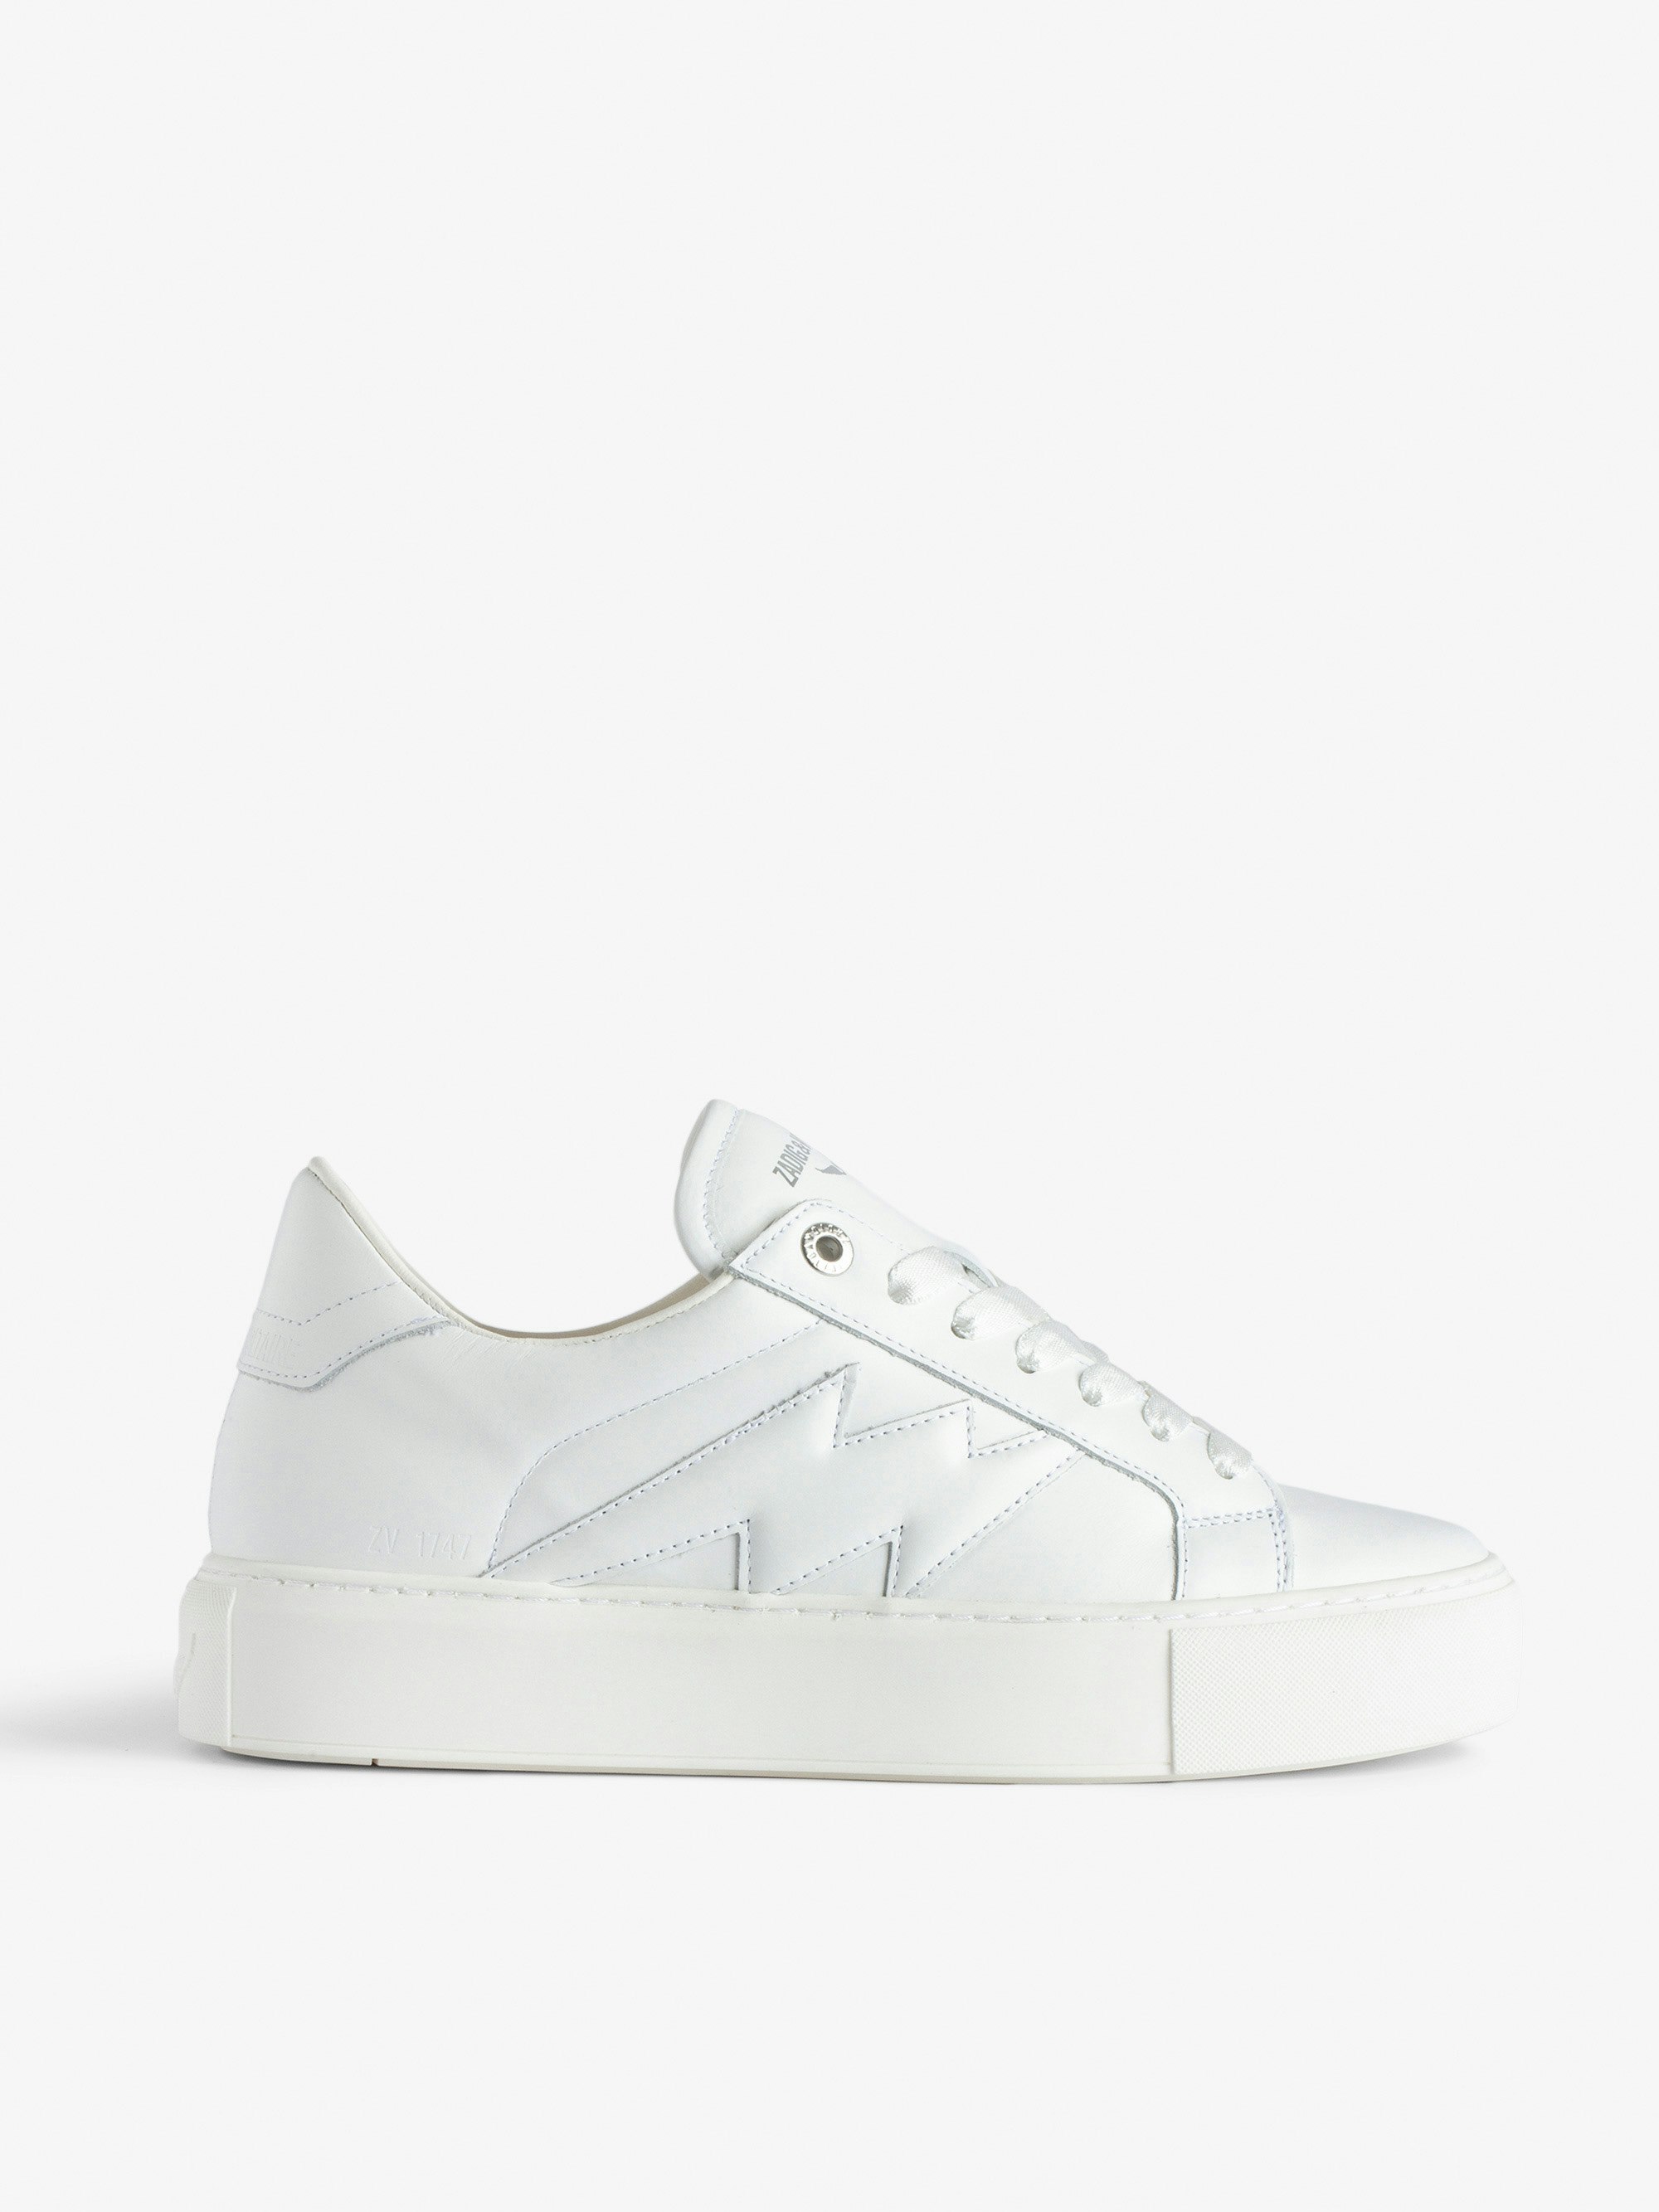 ZV1747 La Flash Low-Top Platform Trainers - Women’s white smooth leather low-top trainers with lightning bolt panels and chunky sole.